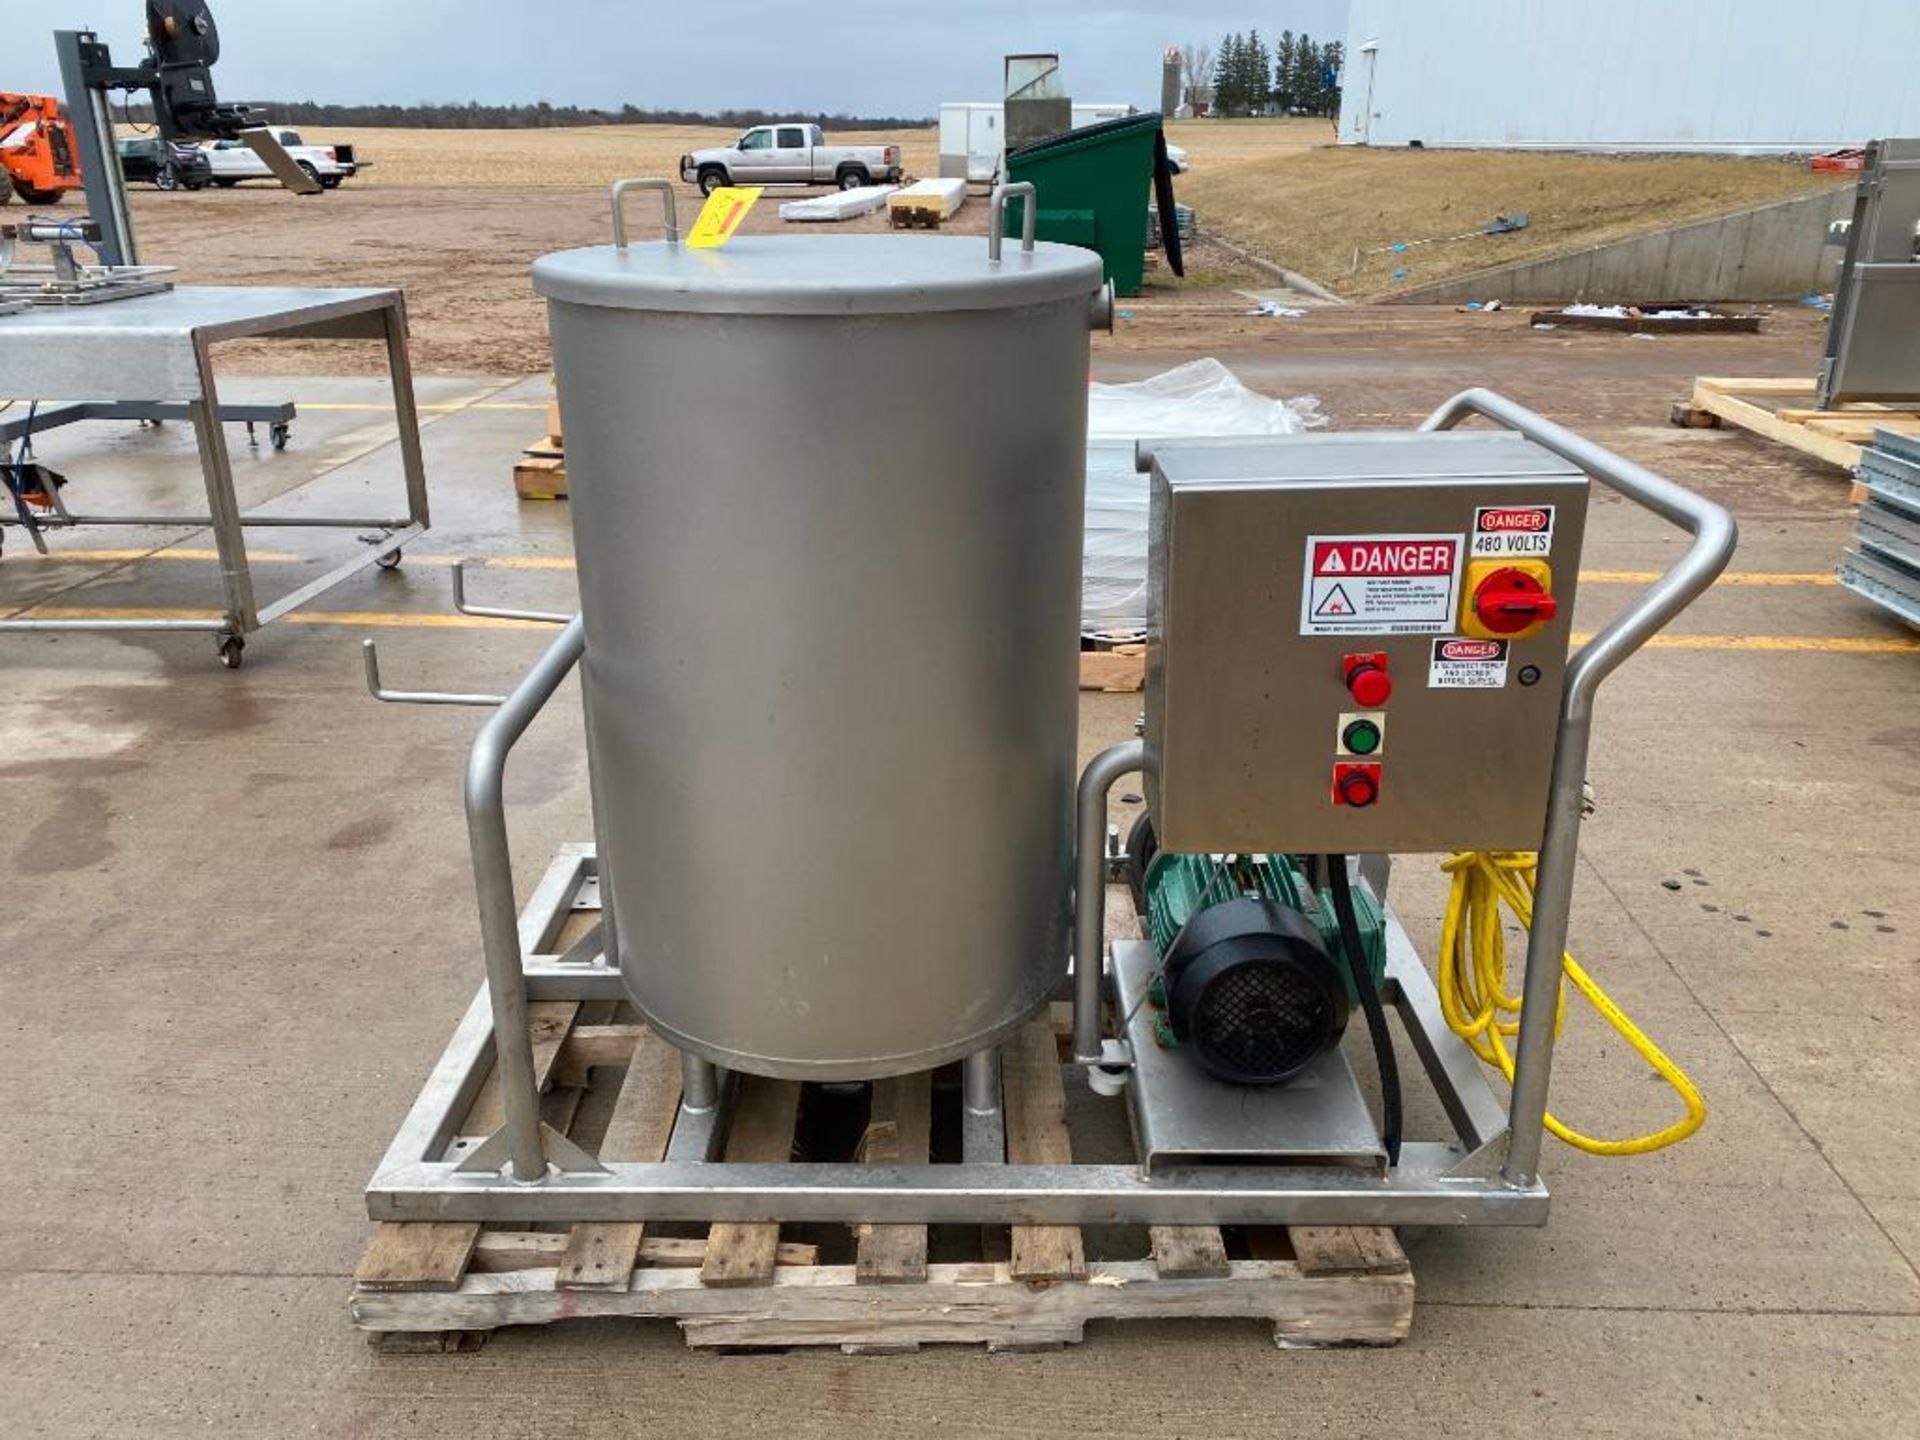 65 Gallon S/S Tank with Centrifugal Pump and Mounted on S/S Skid with Controls (Location: Fall Creek - Image 2 of 2